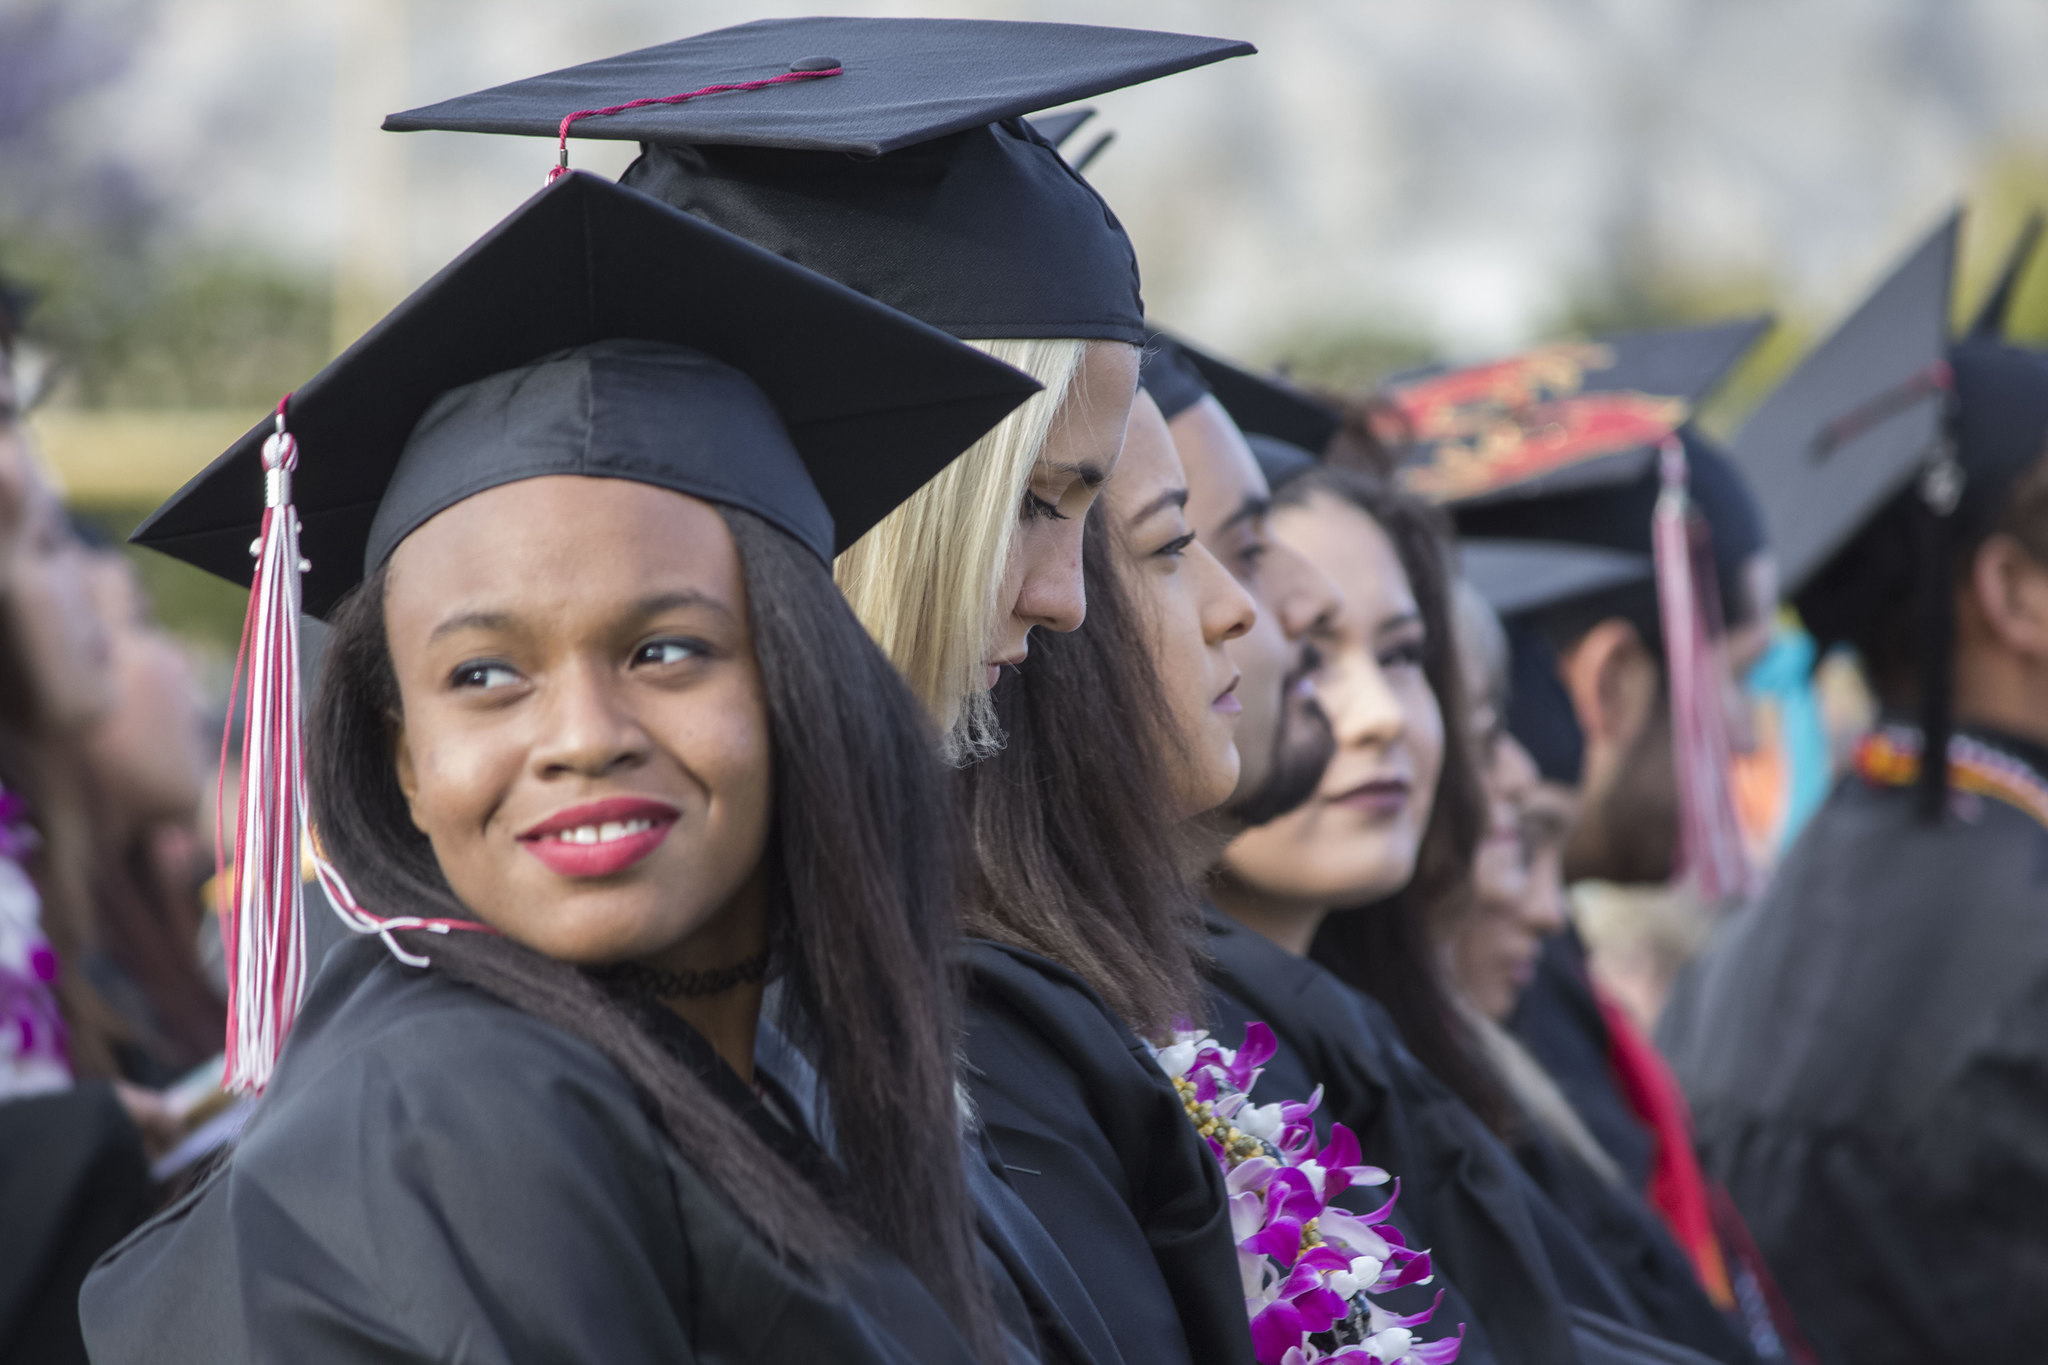 Graduates await their names to be called during Palomar College 2016 Commencement Ceremony on May 20. Niko Holt/The Telescope